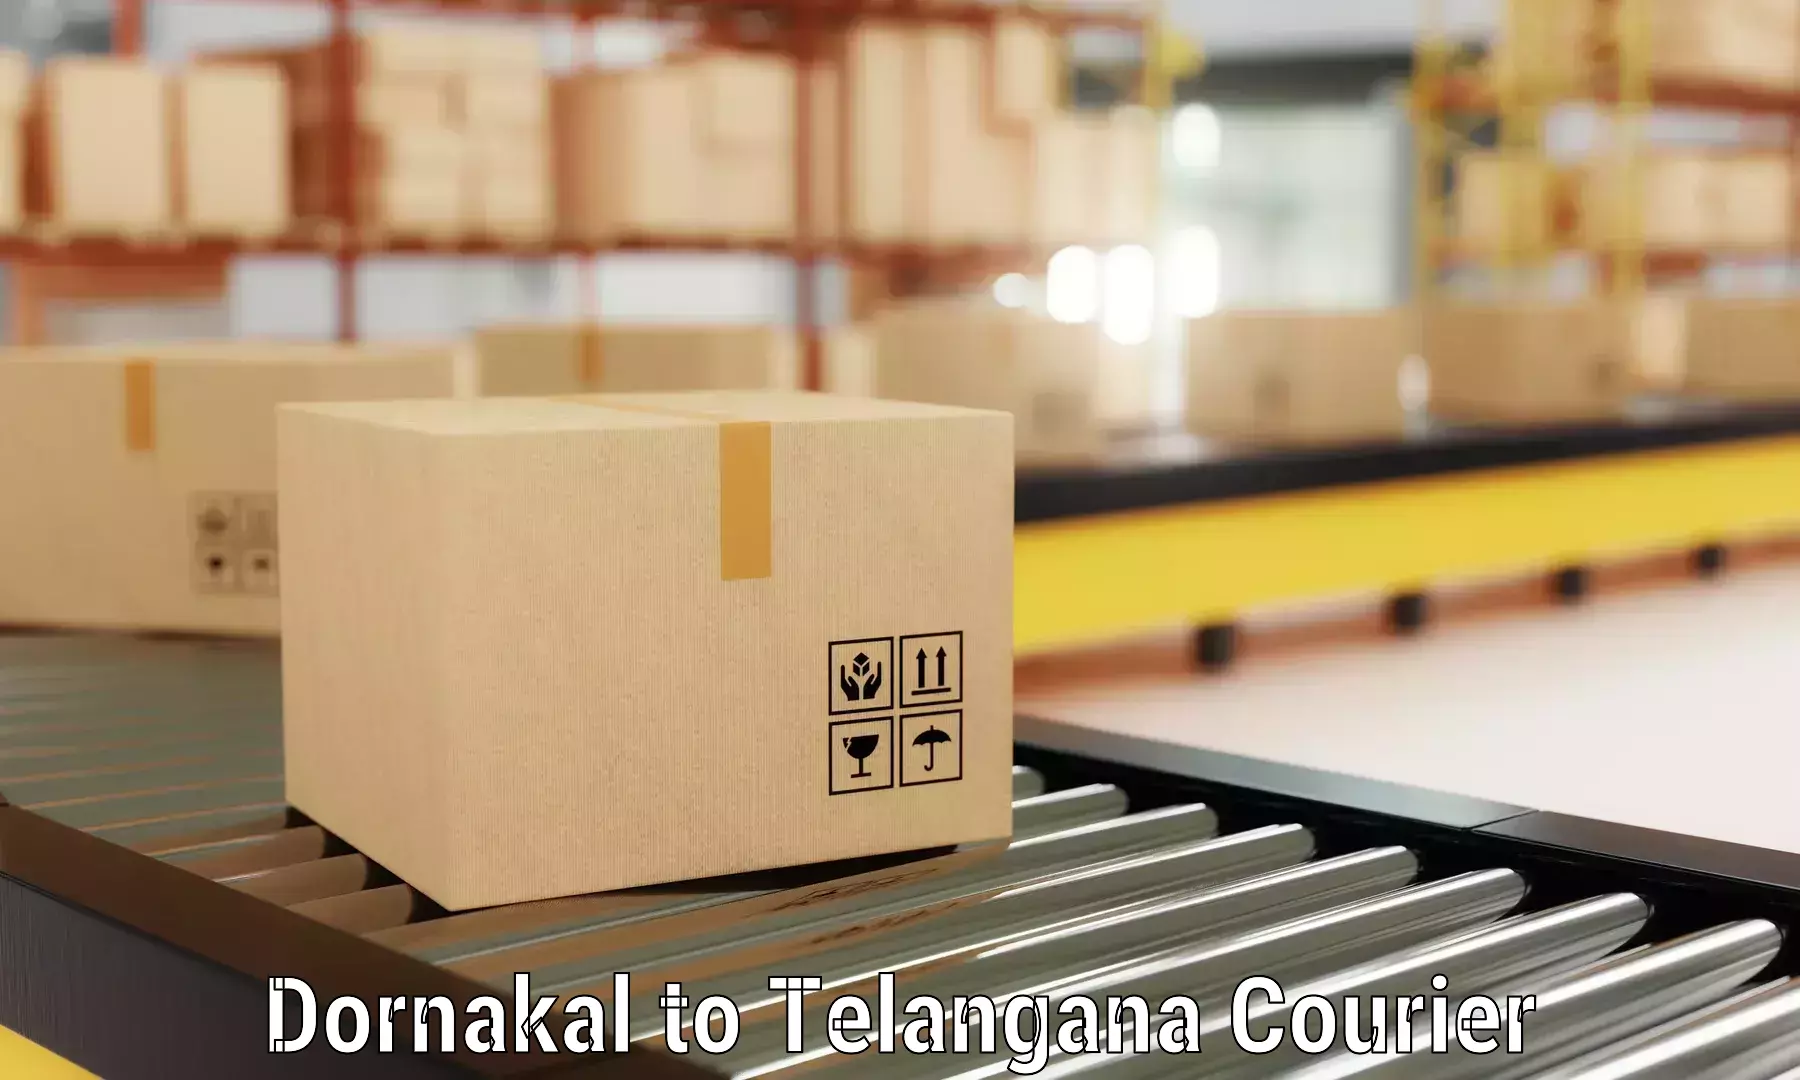 Furniture delivery service Dornakal to Trimulgherry